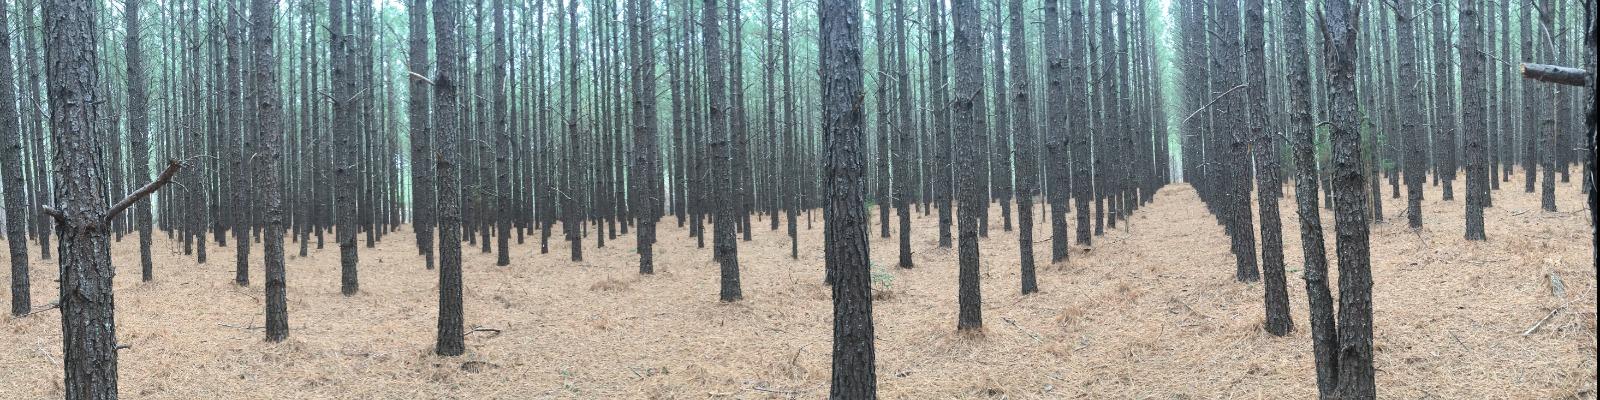 Eastern Virginia and Northeast North Carolina Forestry Management Services Cover